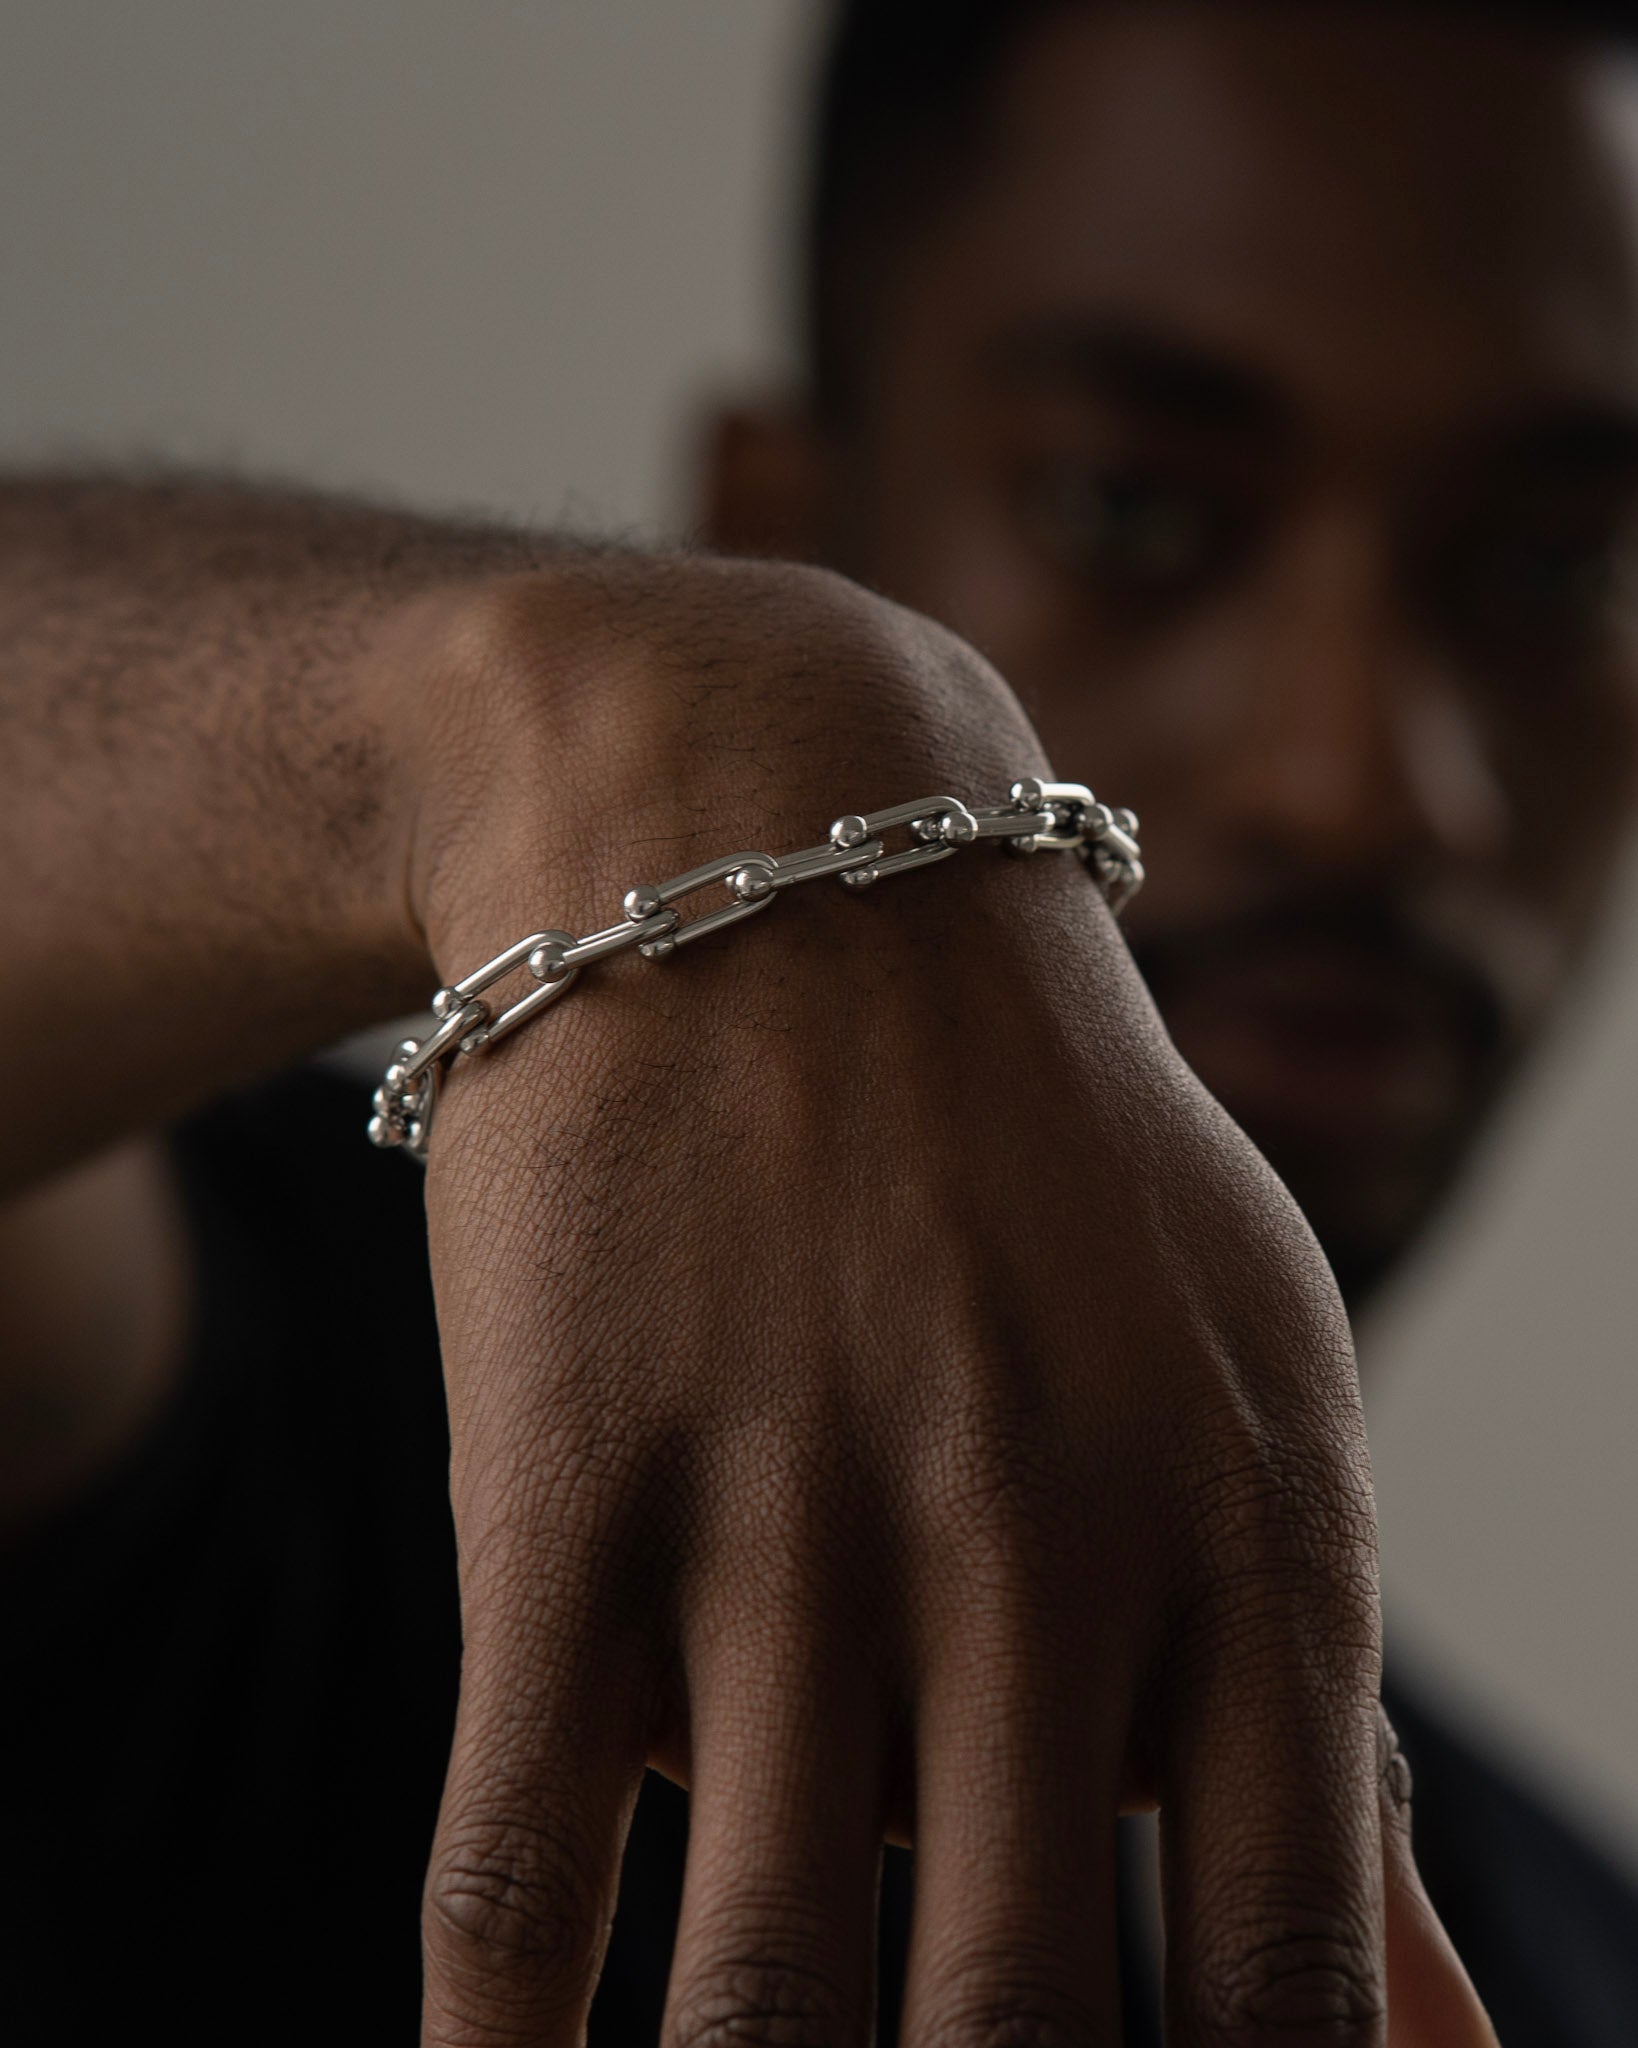 Sepik men's bracelet by Five Jwlry, designed with a 5mm U-shape horseshoe buckle chain in silver-colored, water-resistant 316L stainless steel. Available in sizes 20cm and 23cm. Hypoallergenic with a 2-year warranty.